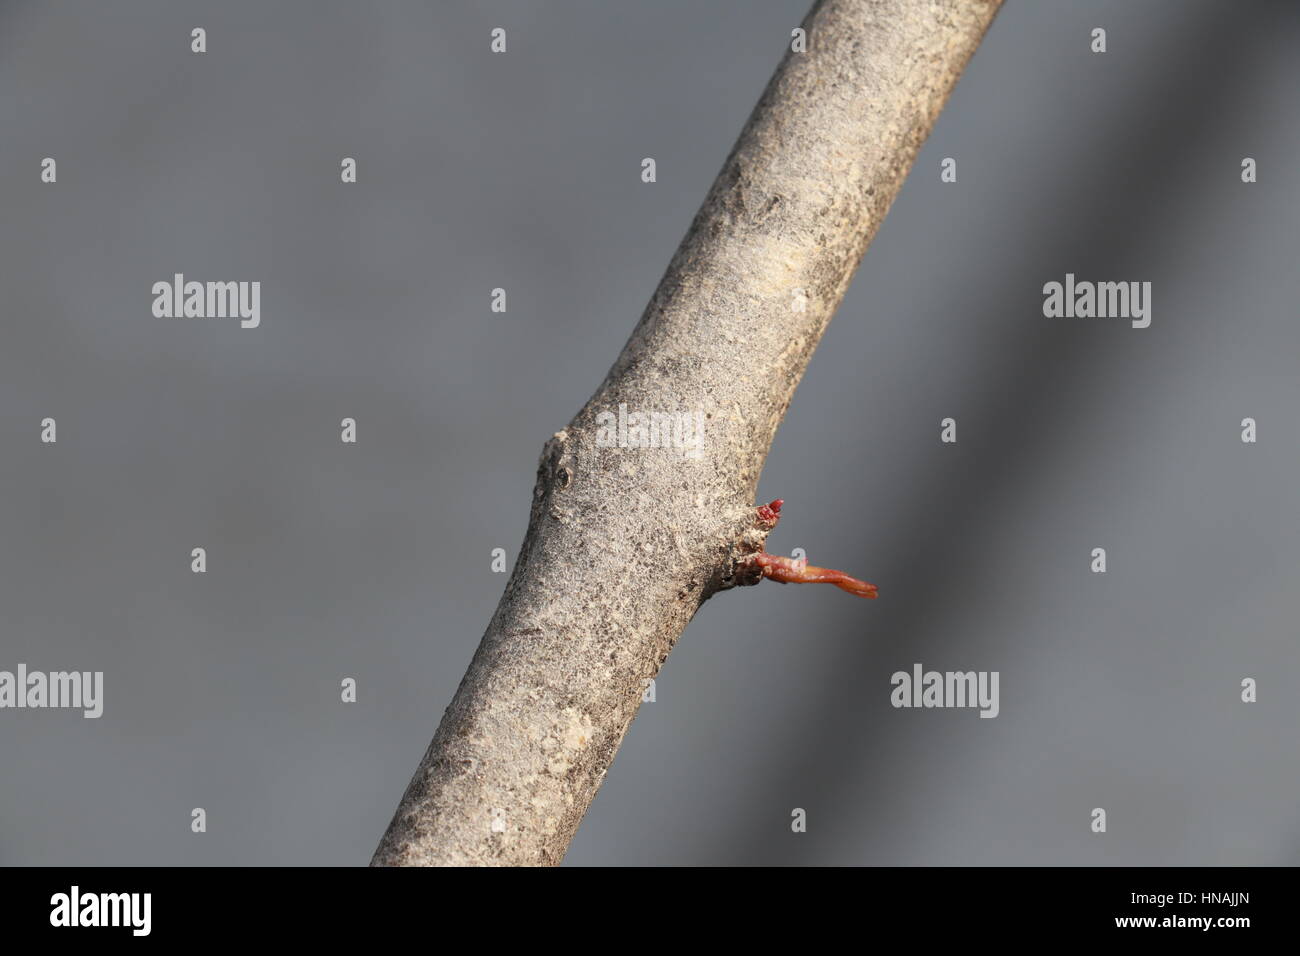 Tree and Stems Focused Stock Photo